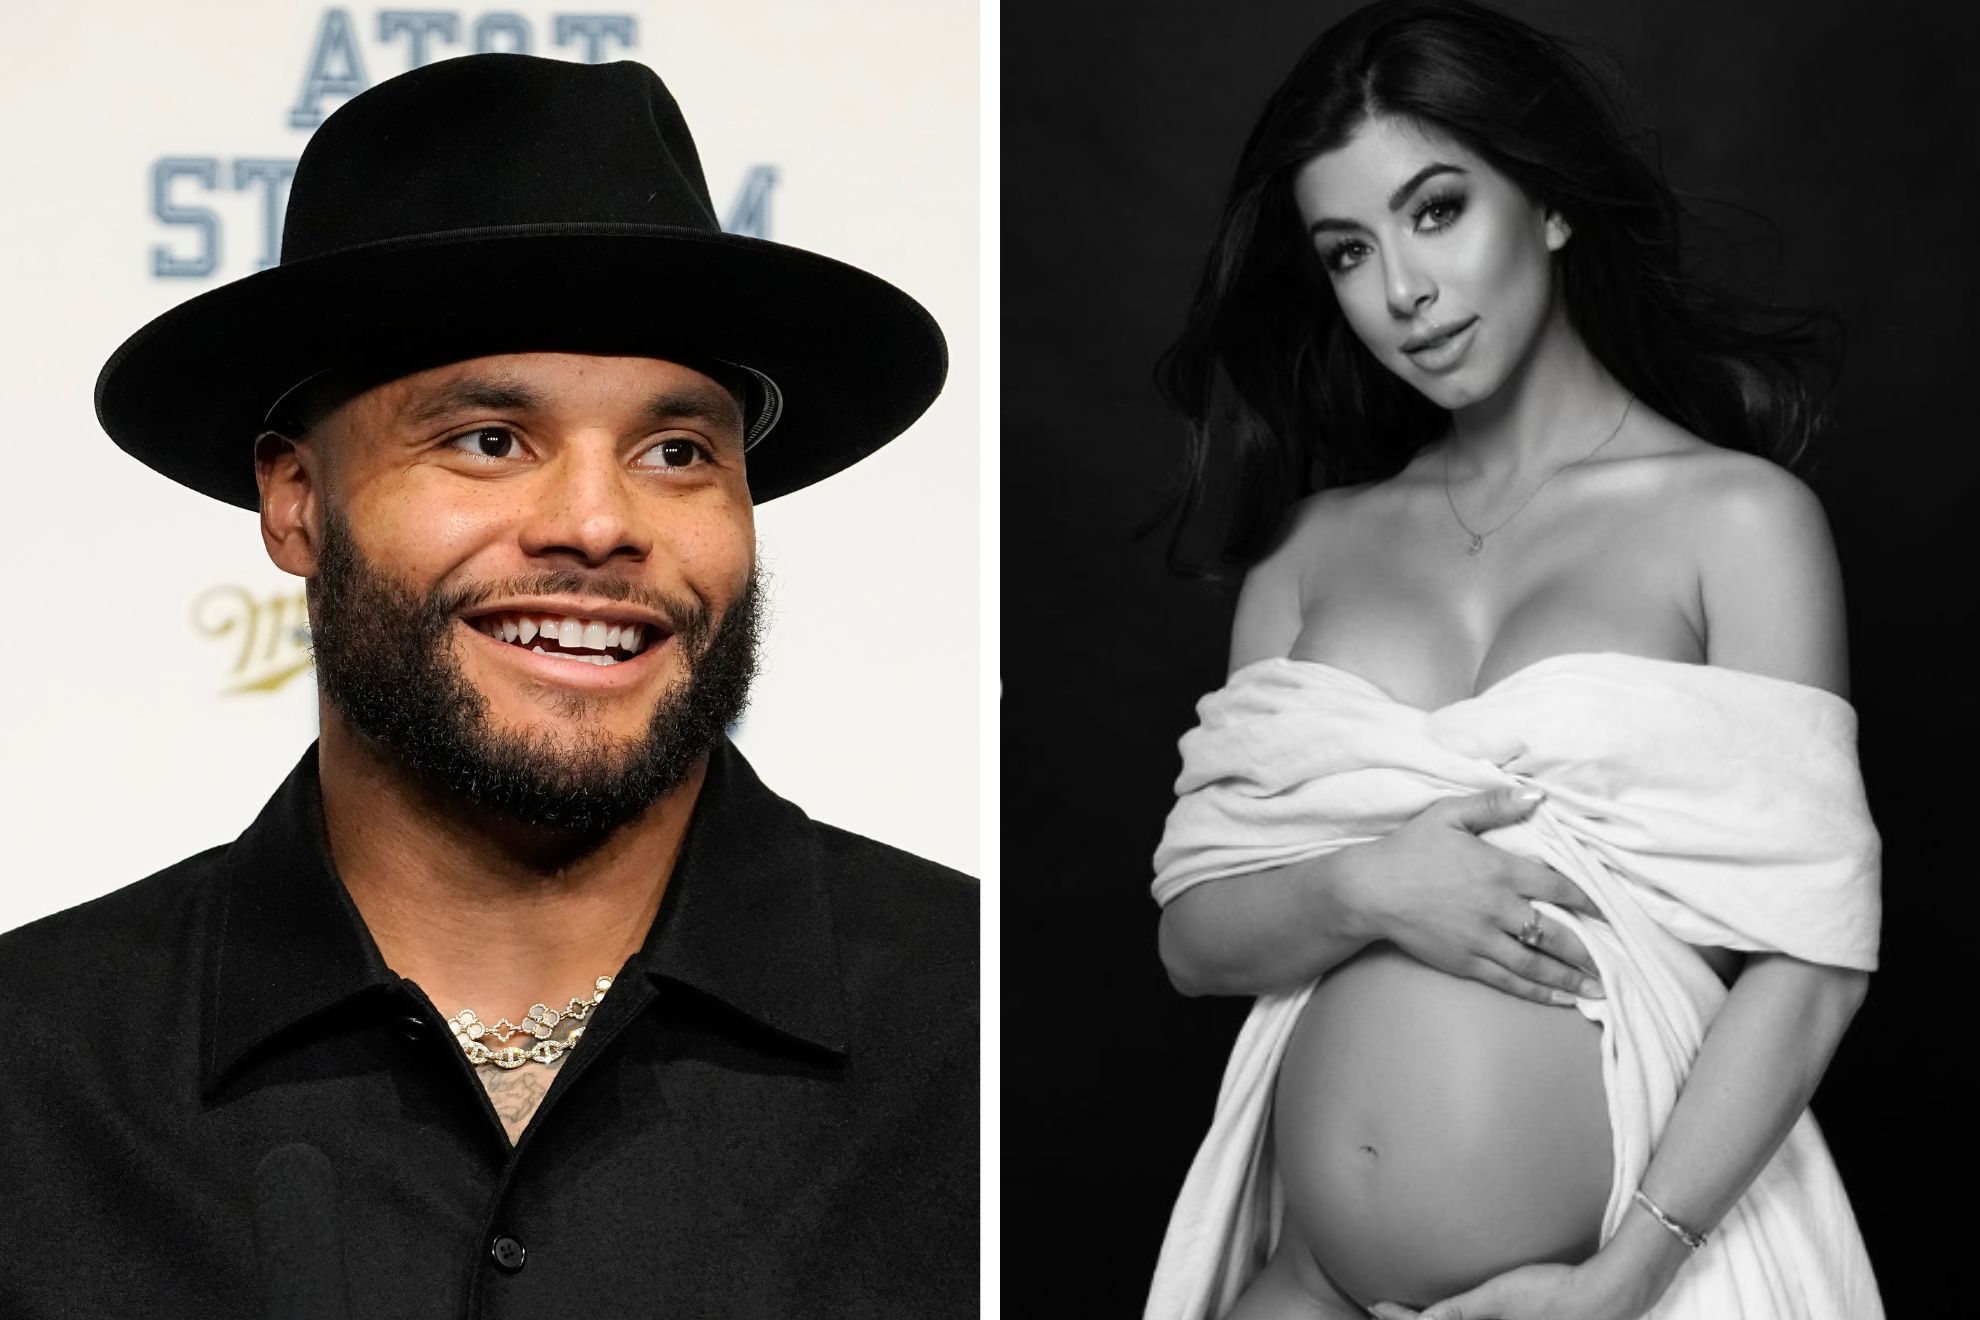 Dak Prescott set to become a first-time father with GF Sarah Jane: boy or girl?